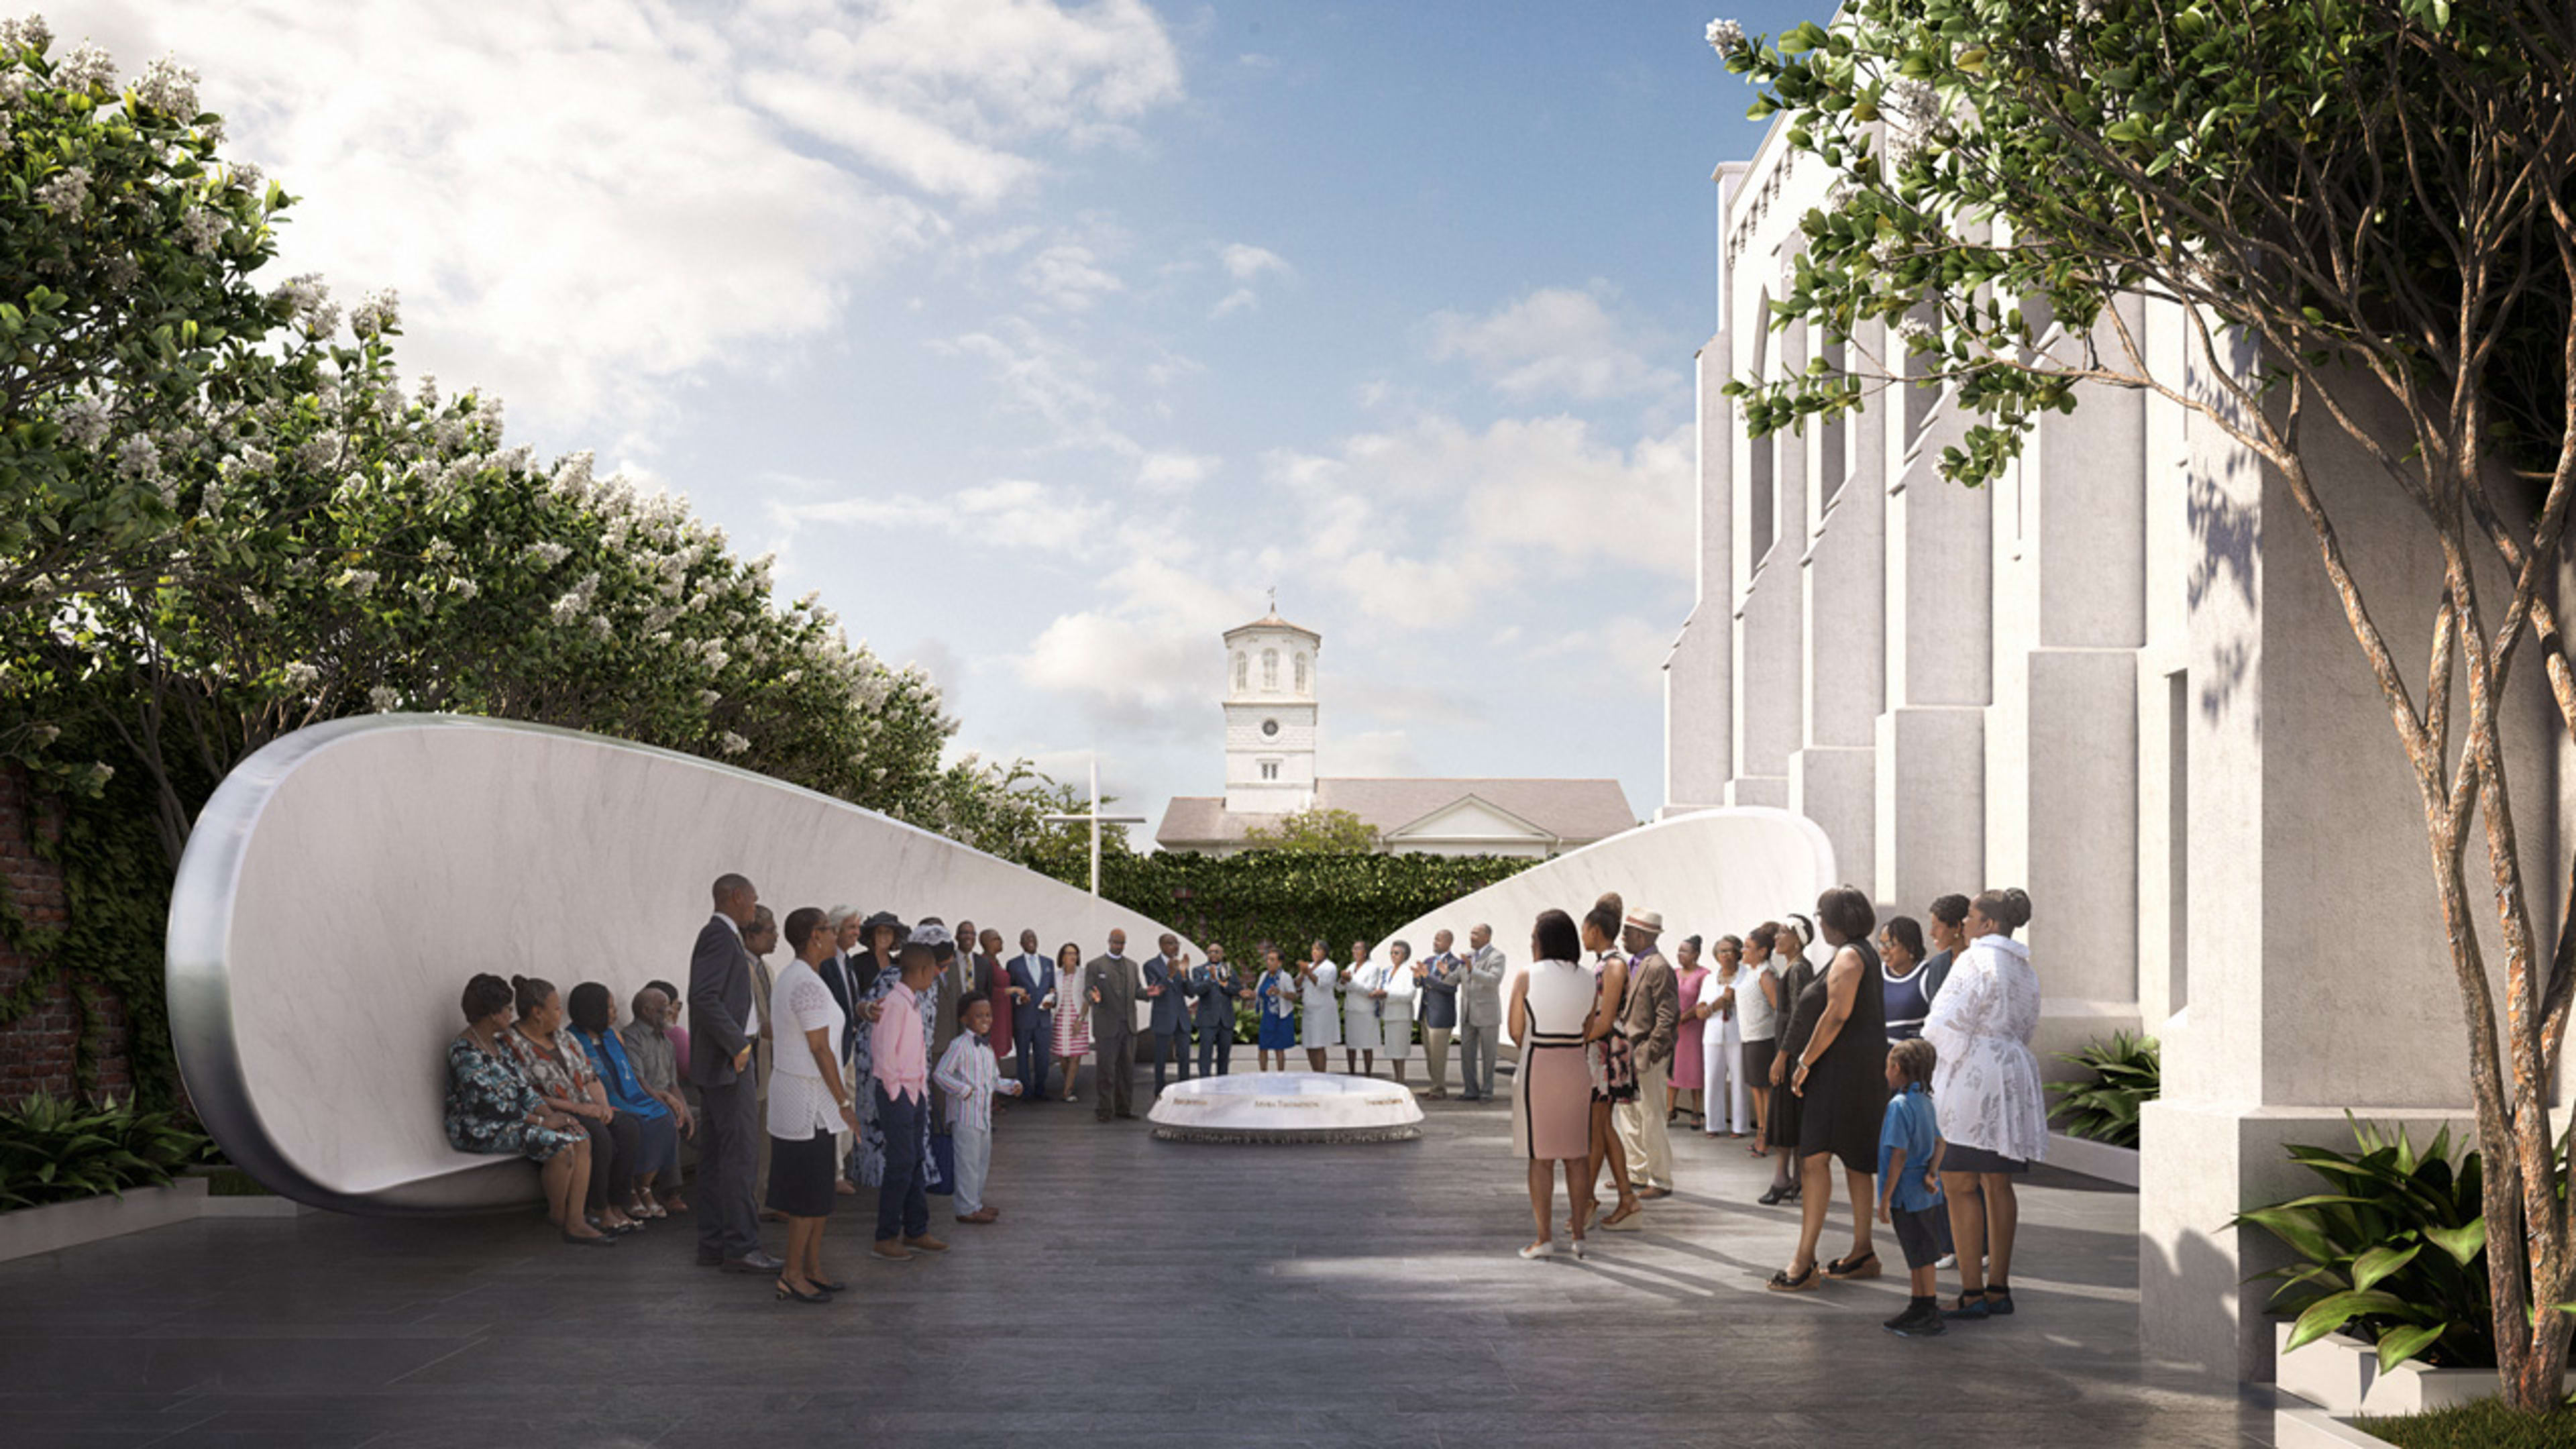 First look: A memorial to the victims of the Charleston massacre